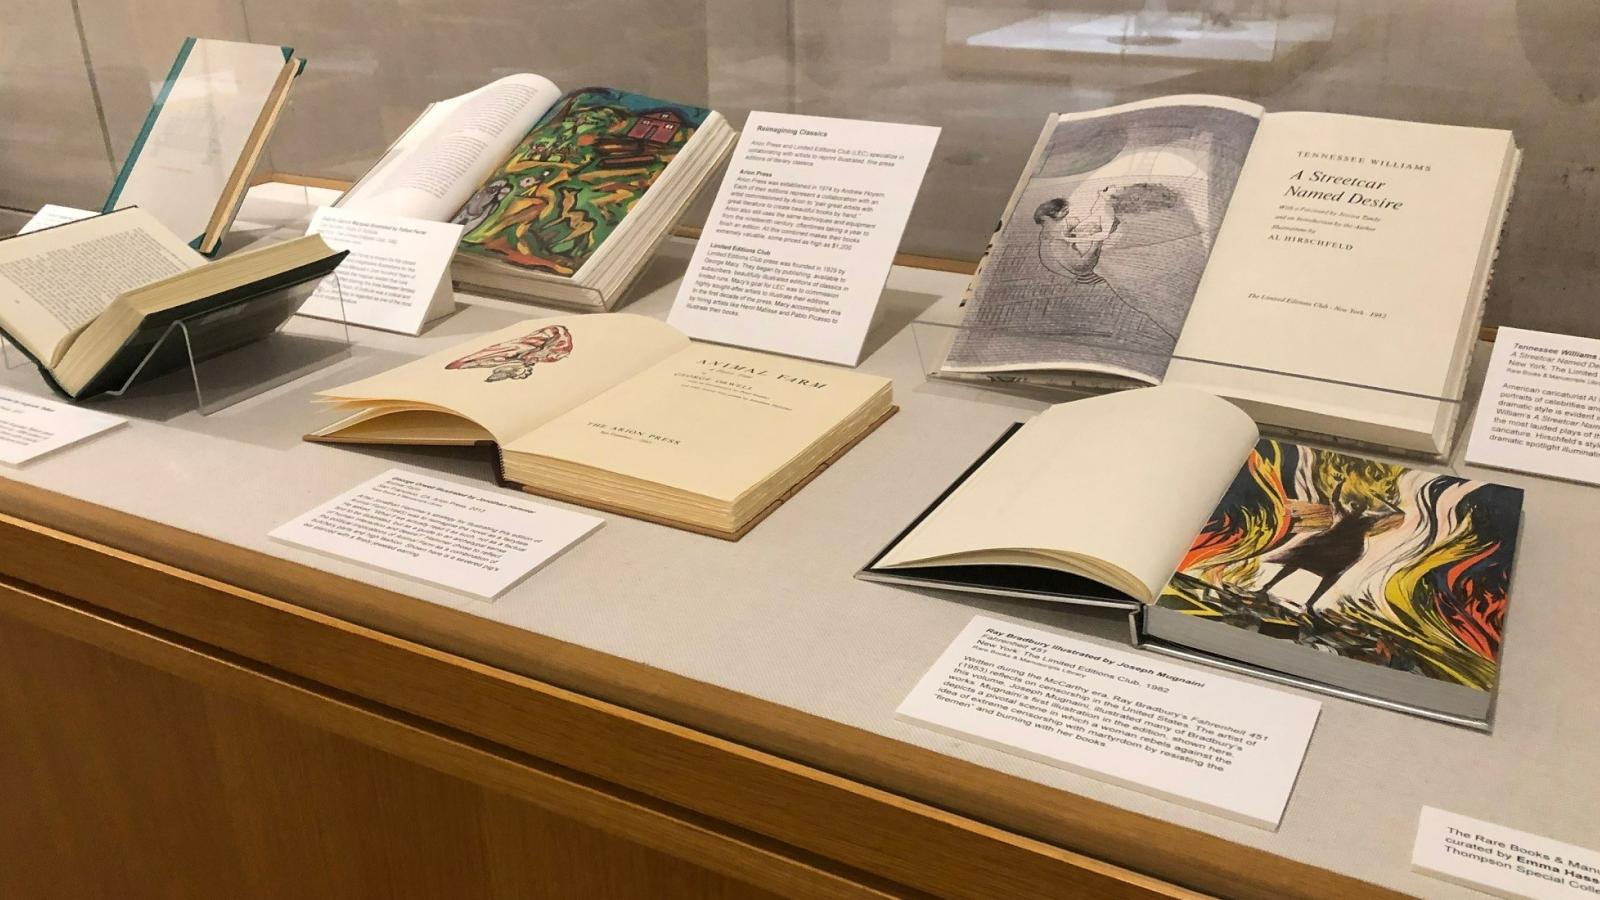 Rare books on display in cabinet with labels